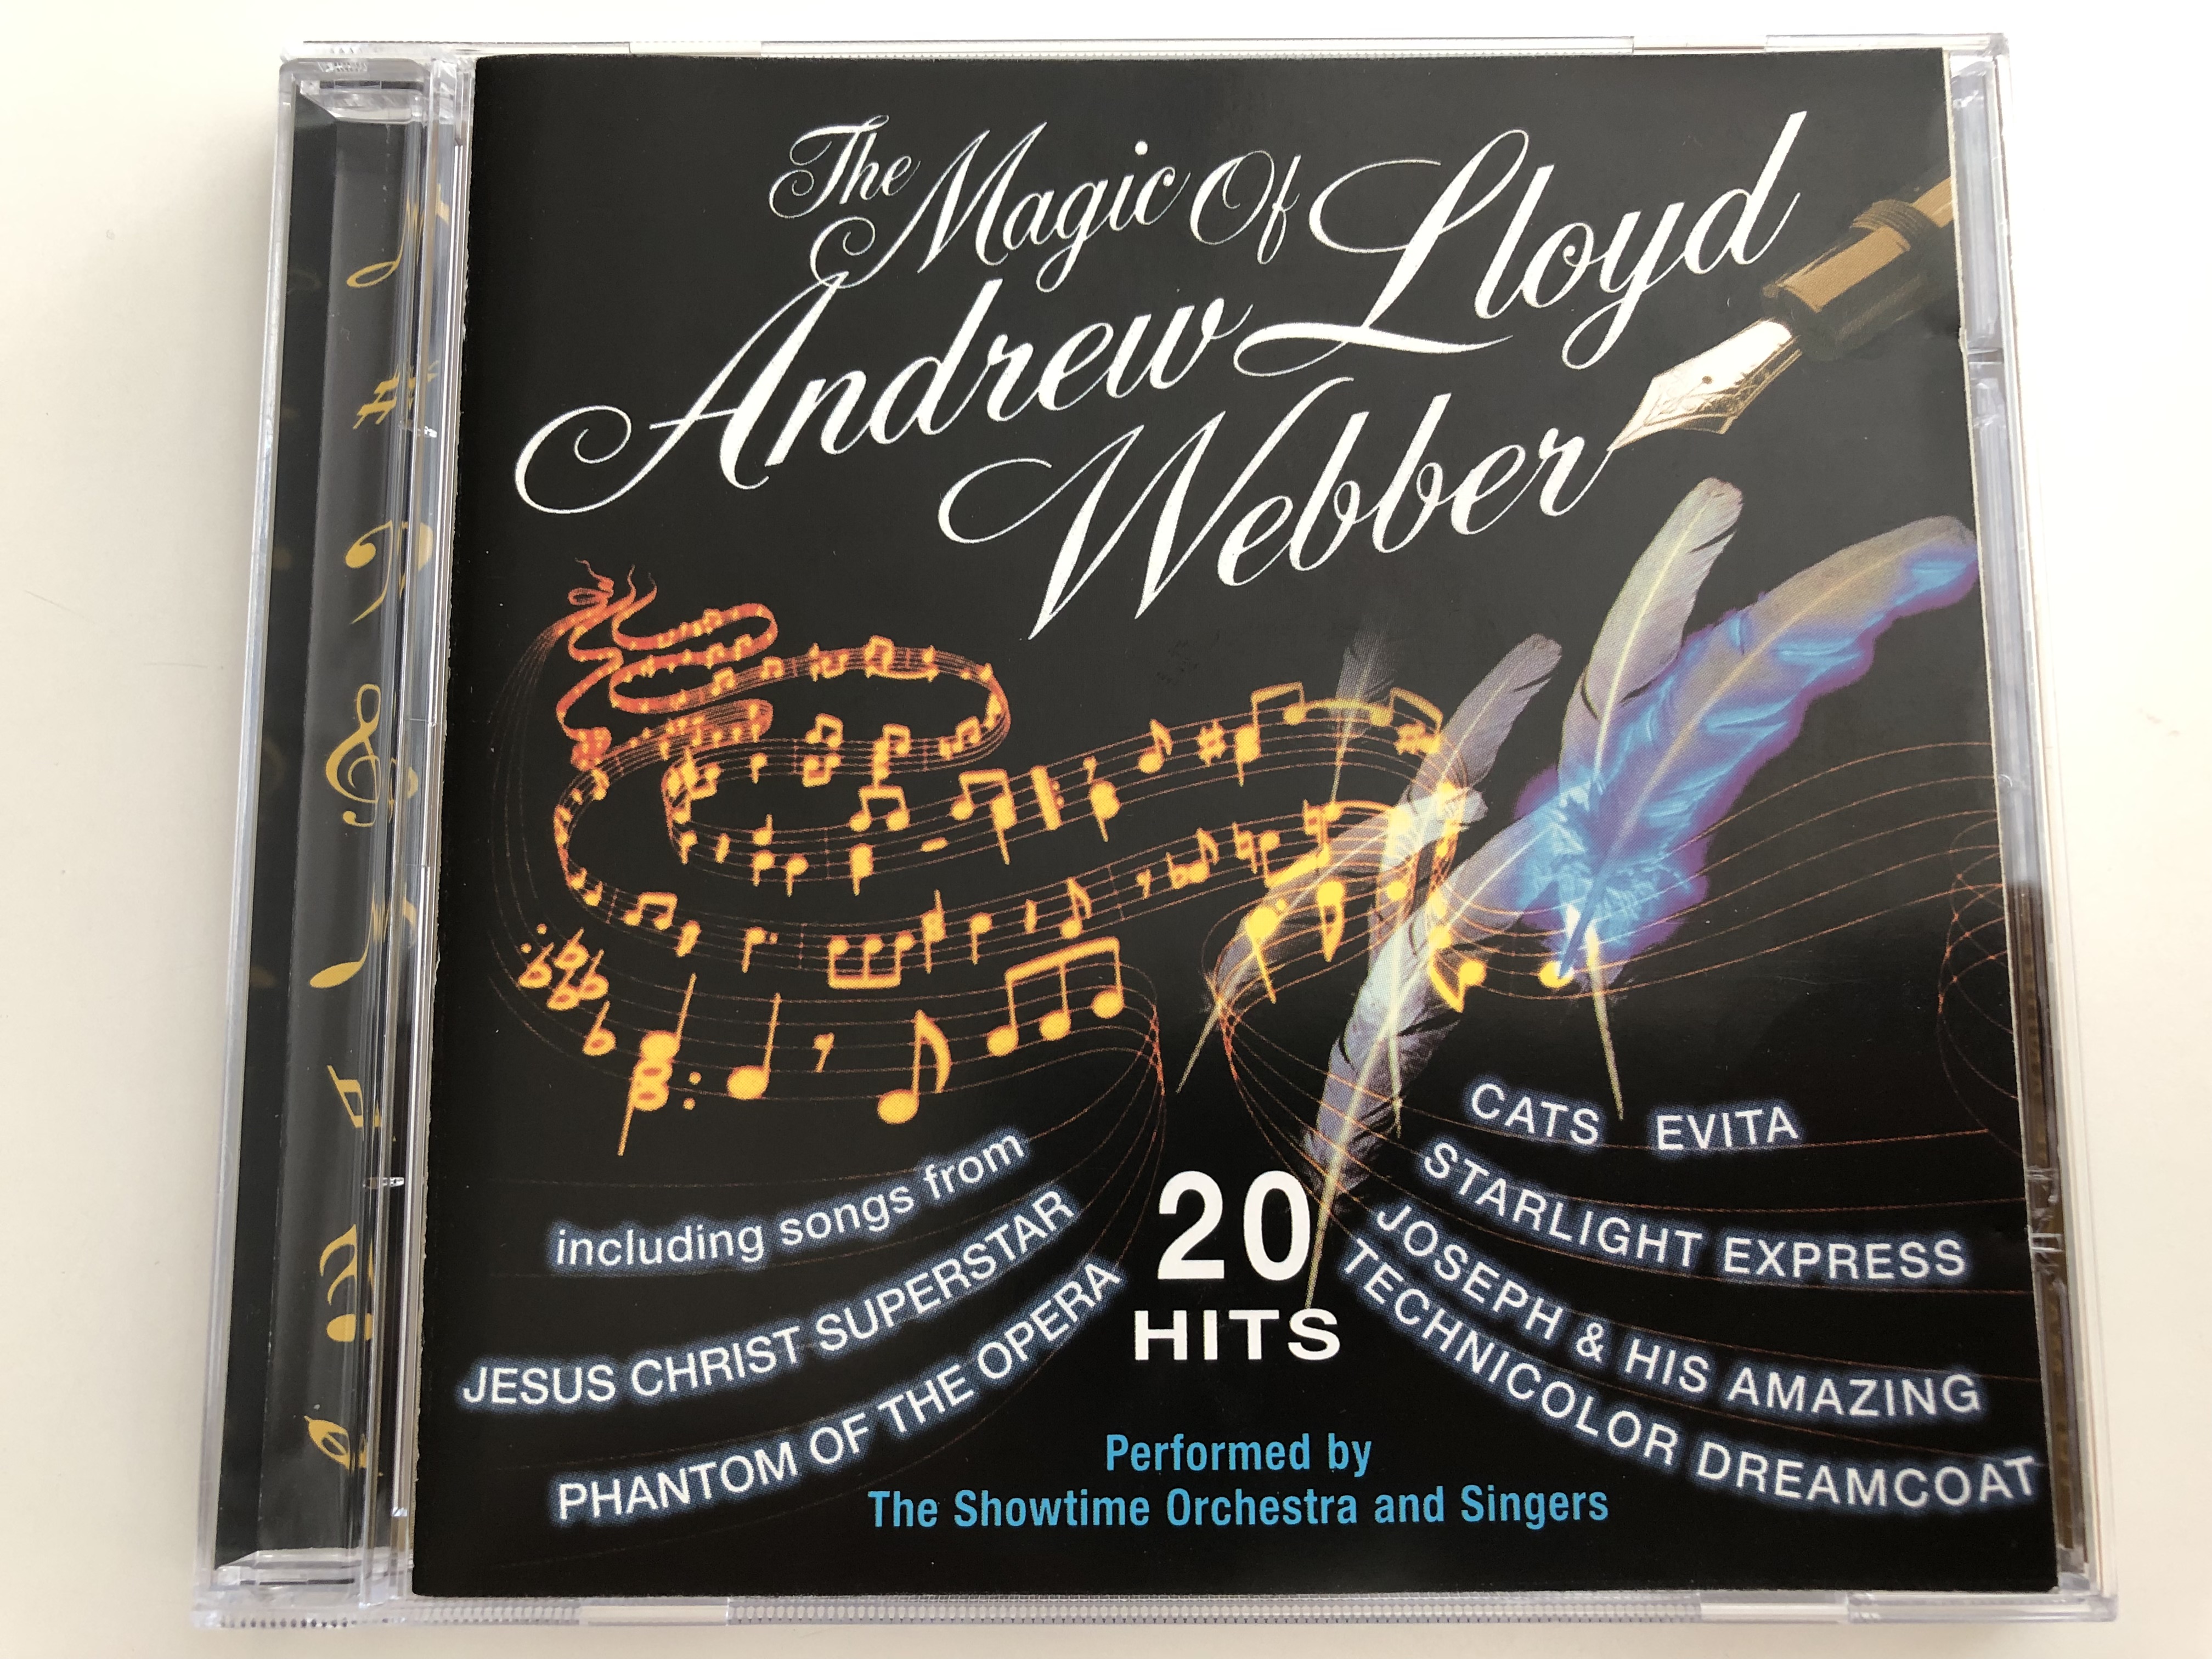 the-magic-of-andrew-lloyd-webber-20-hits-performed-by-the-showtime-orchestra-and-singers-including-songs-from-jesus-christ-superstar-phantom-of-the-opera-cats-evita-audio-cd-platcd-1126-1-.jpg